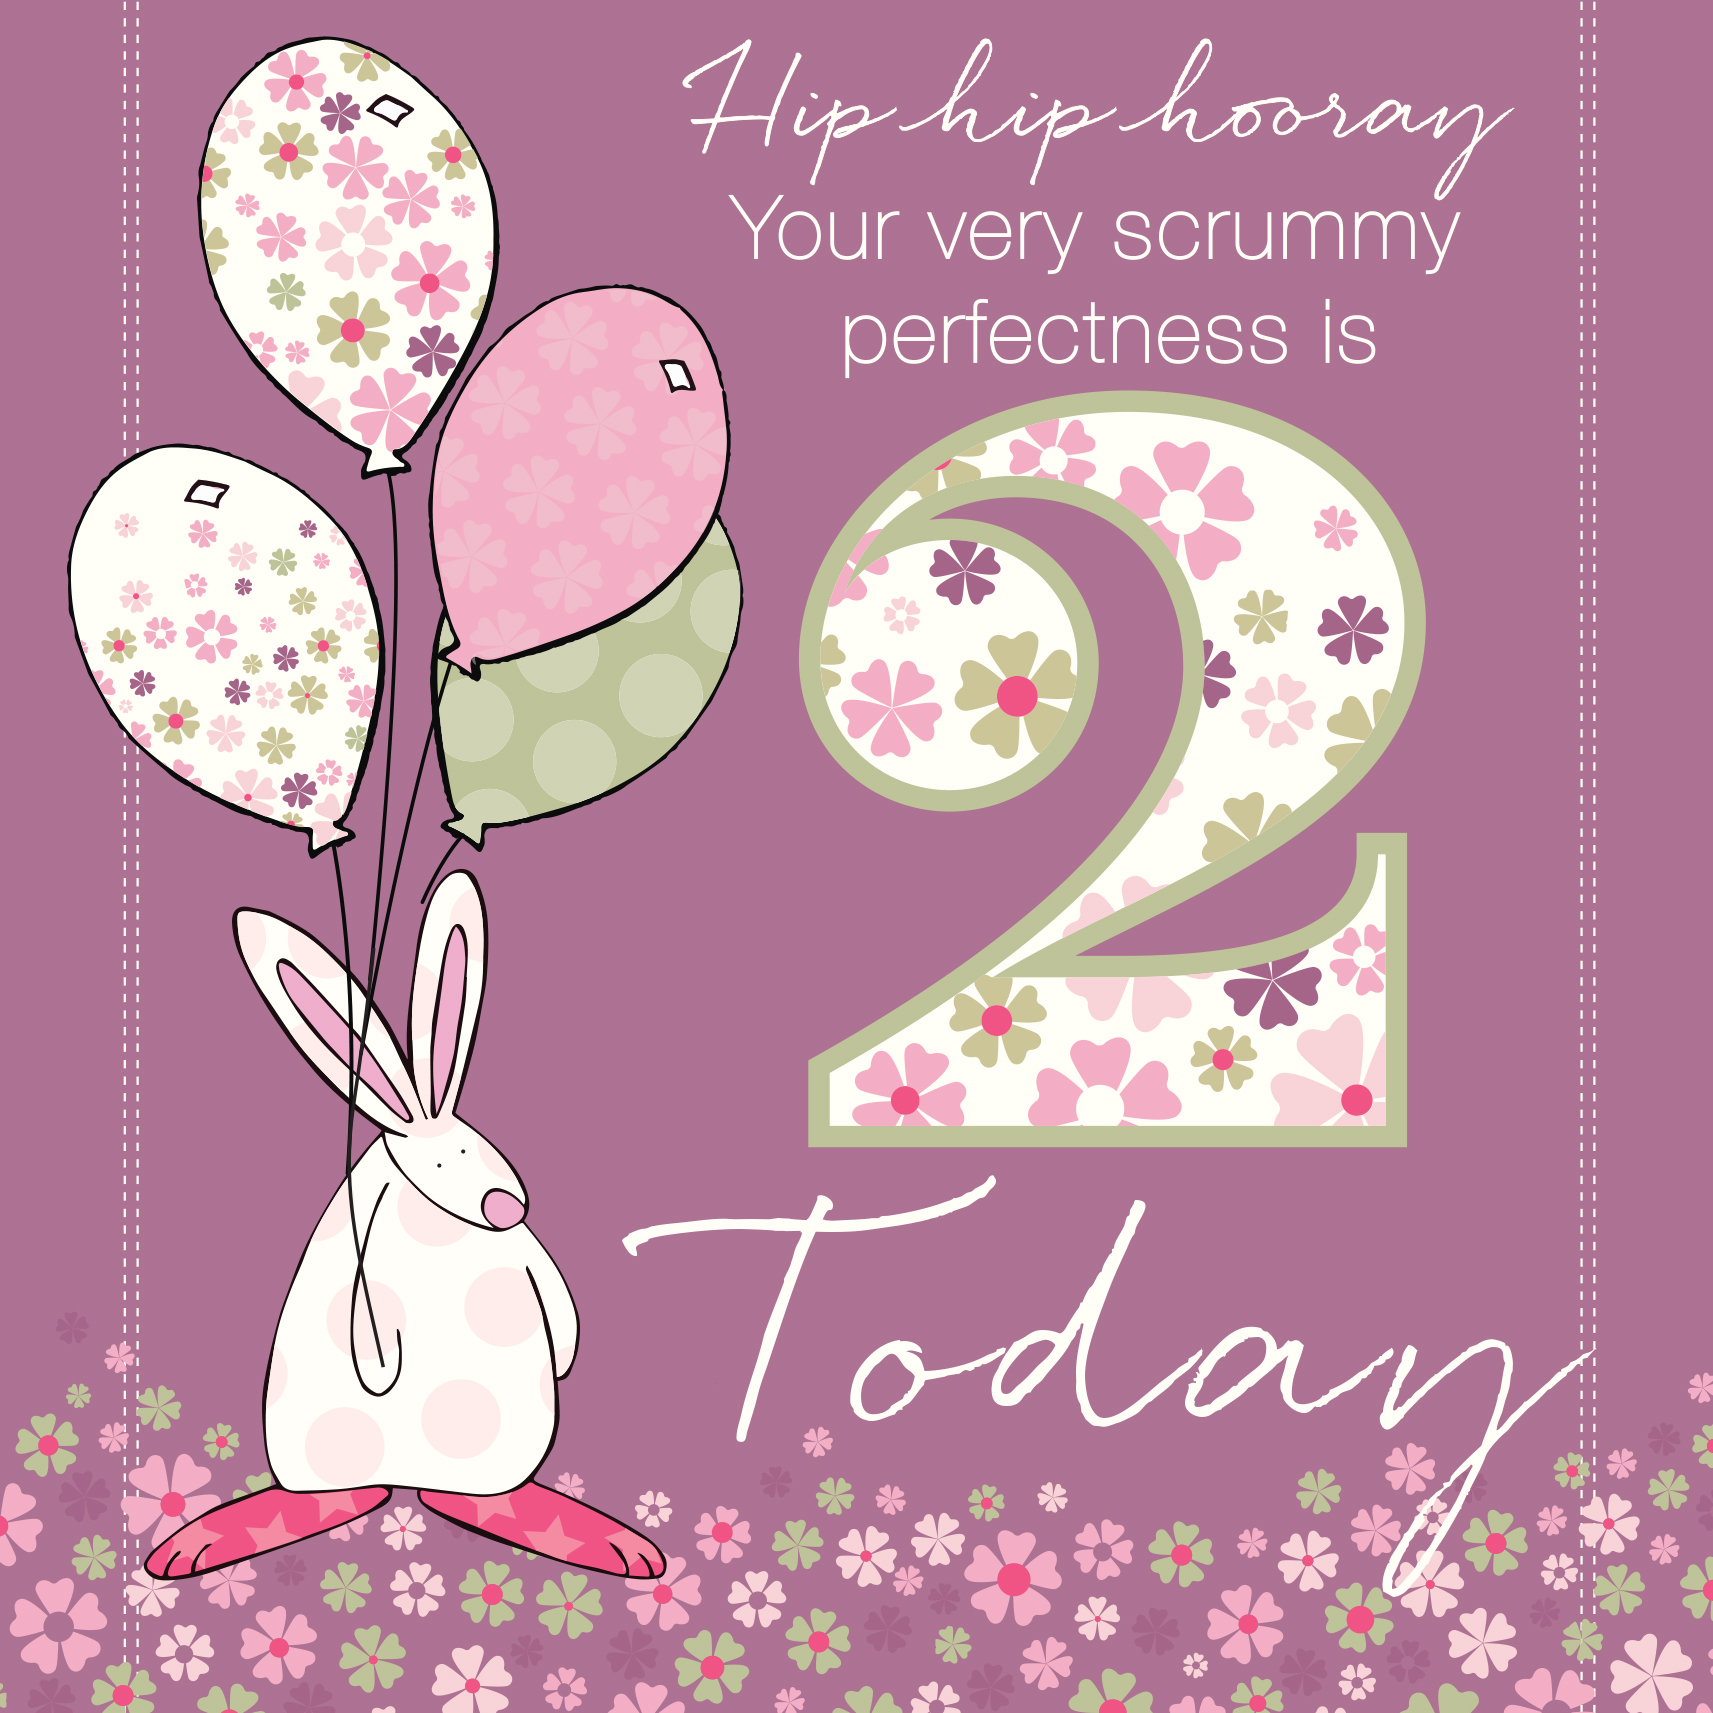 girl-age-2-birthday-card-by-rufus-rabbit-lovely-cards-for-children-s